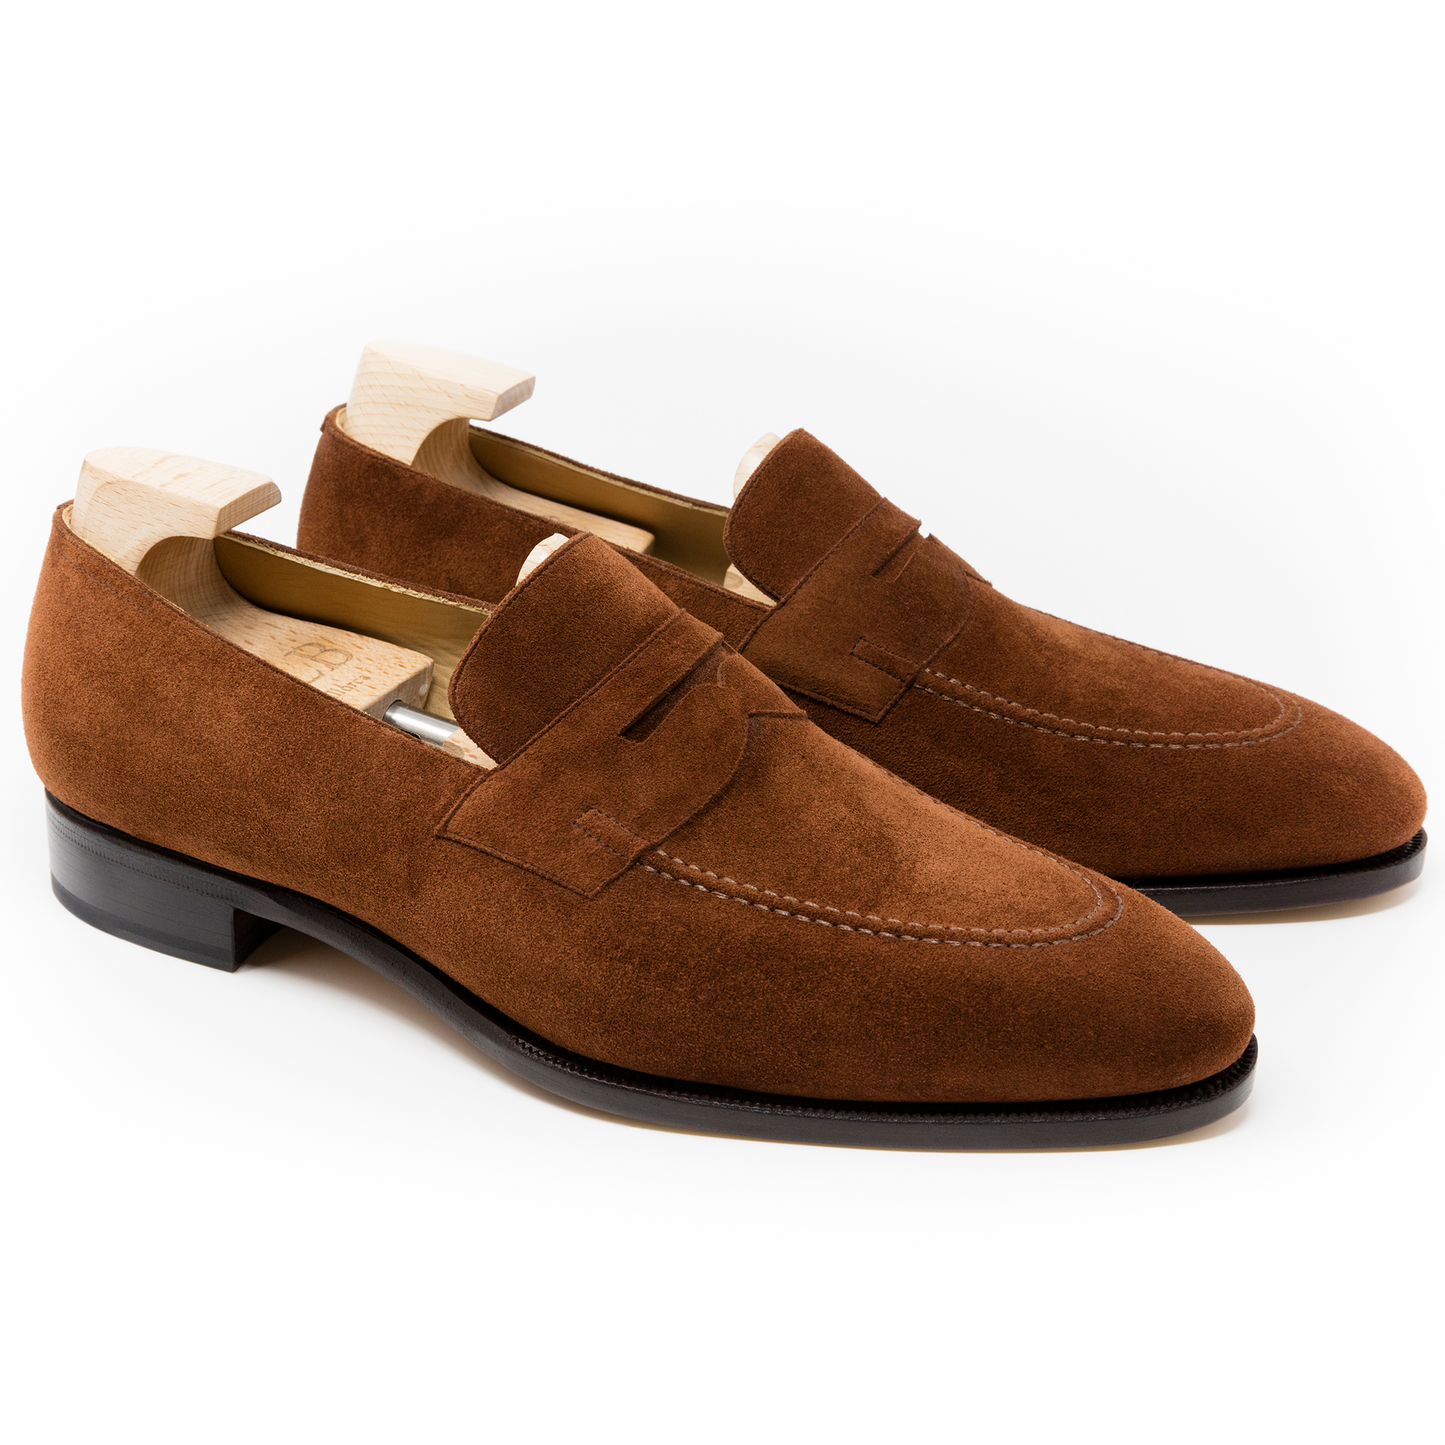 TLB Mallorca leather shoes 117 / GOYA / SUEDE POLO BROWN